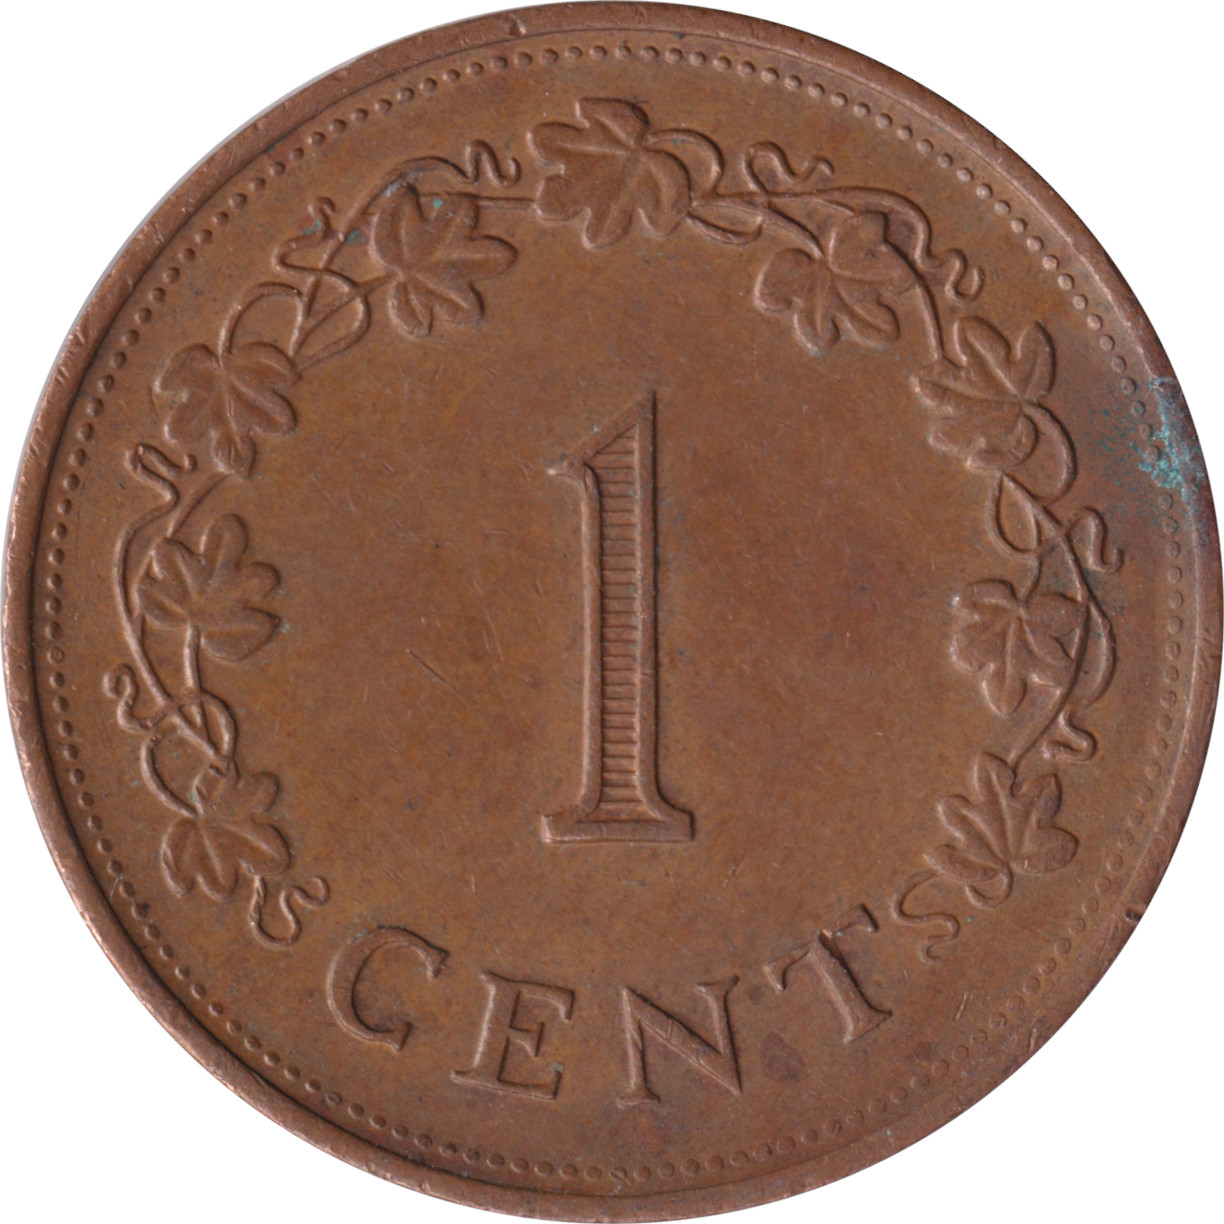 1 cent - Georges Cross - Branches